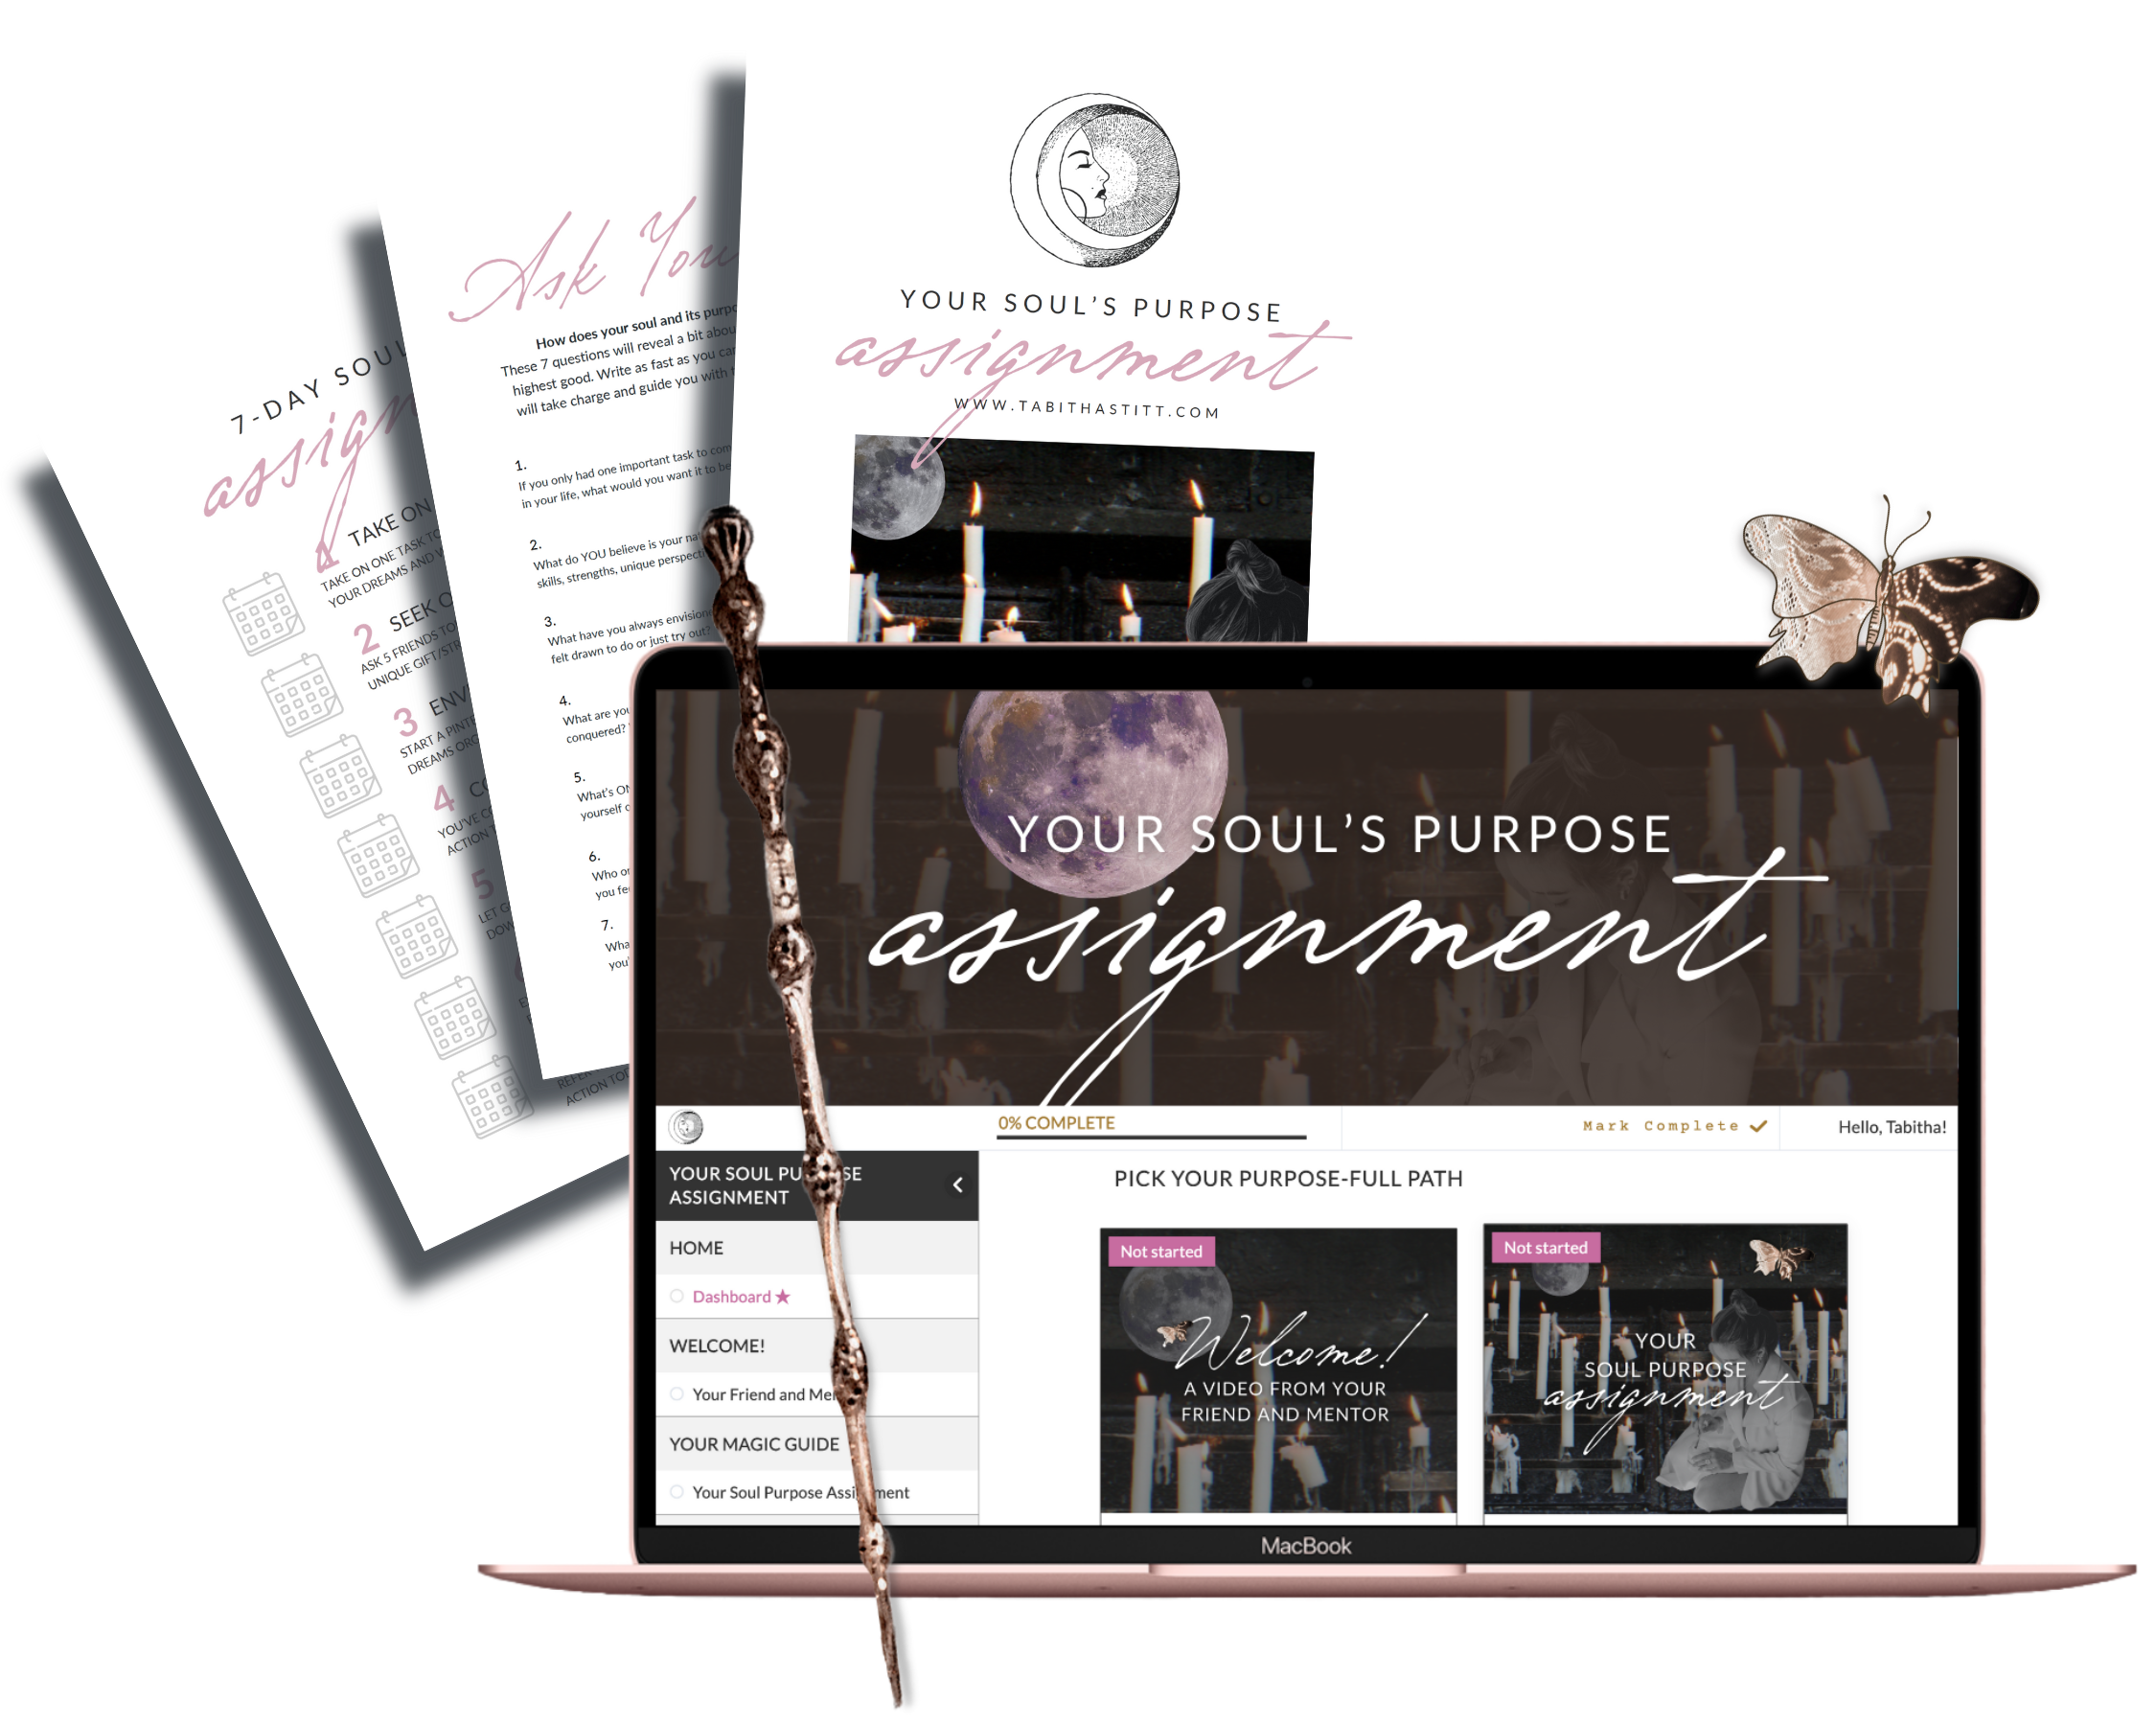 Your Soul's Purpose Assignment Free Open Course from Tabitha Stitt The Self-Help Psychic with a Butterfly for Transformation